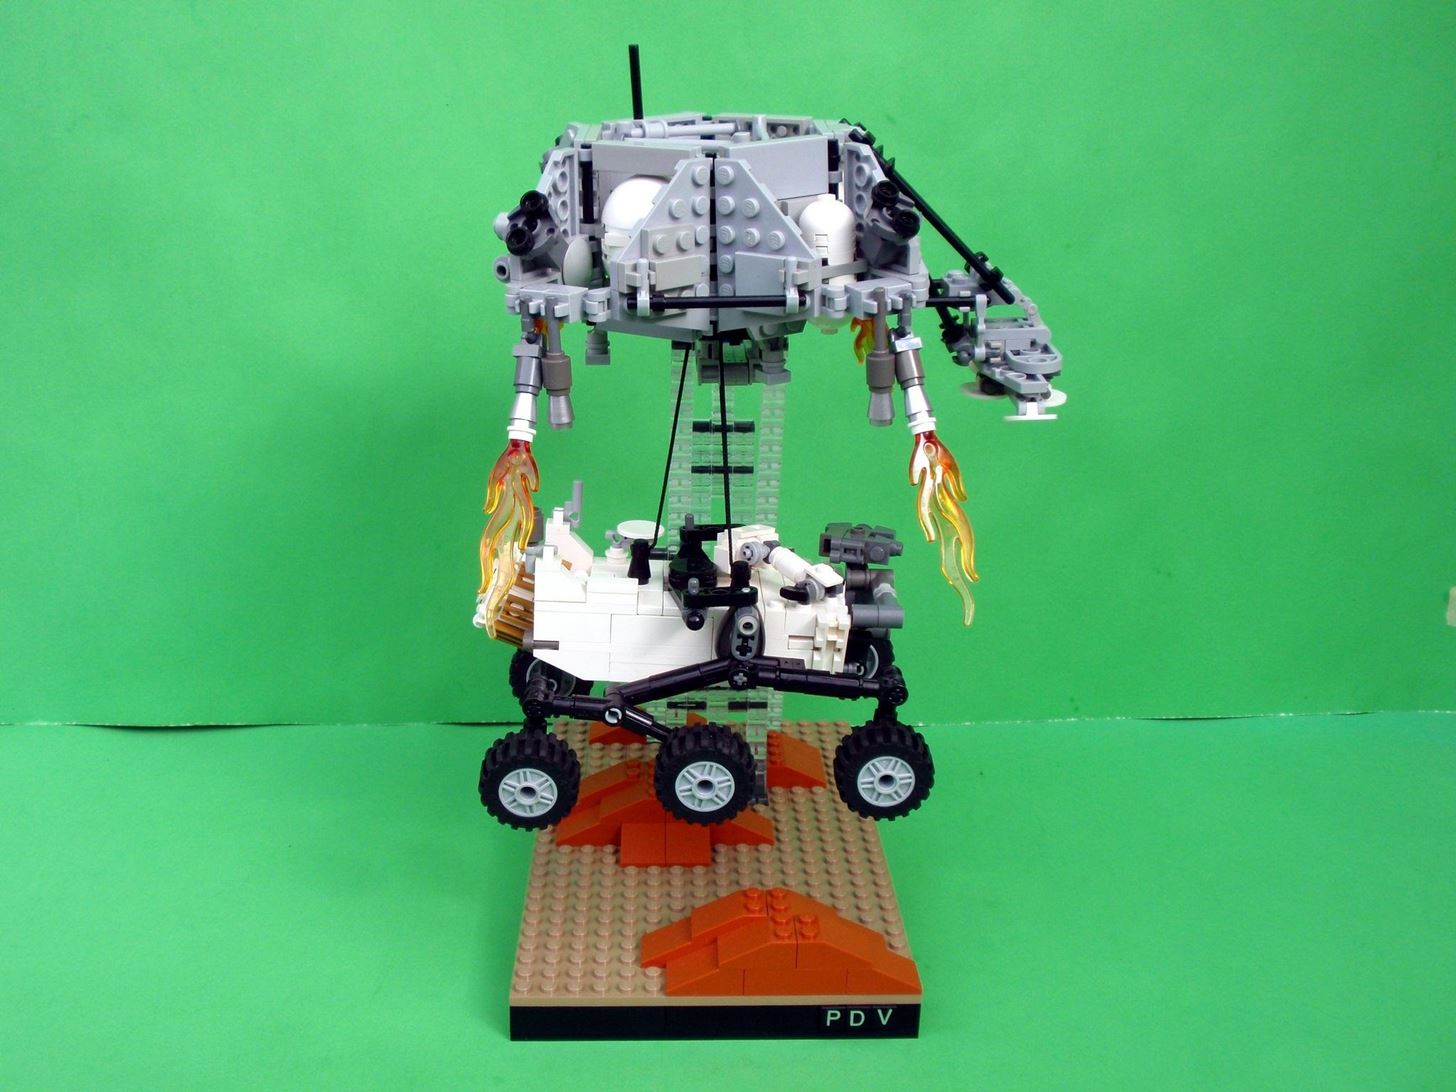 NASA Engineer Shows You How to Build a Mini Curiosity Mars Rover Out of LEGOs